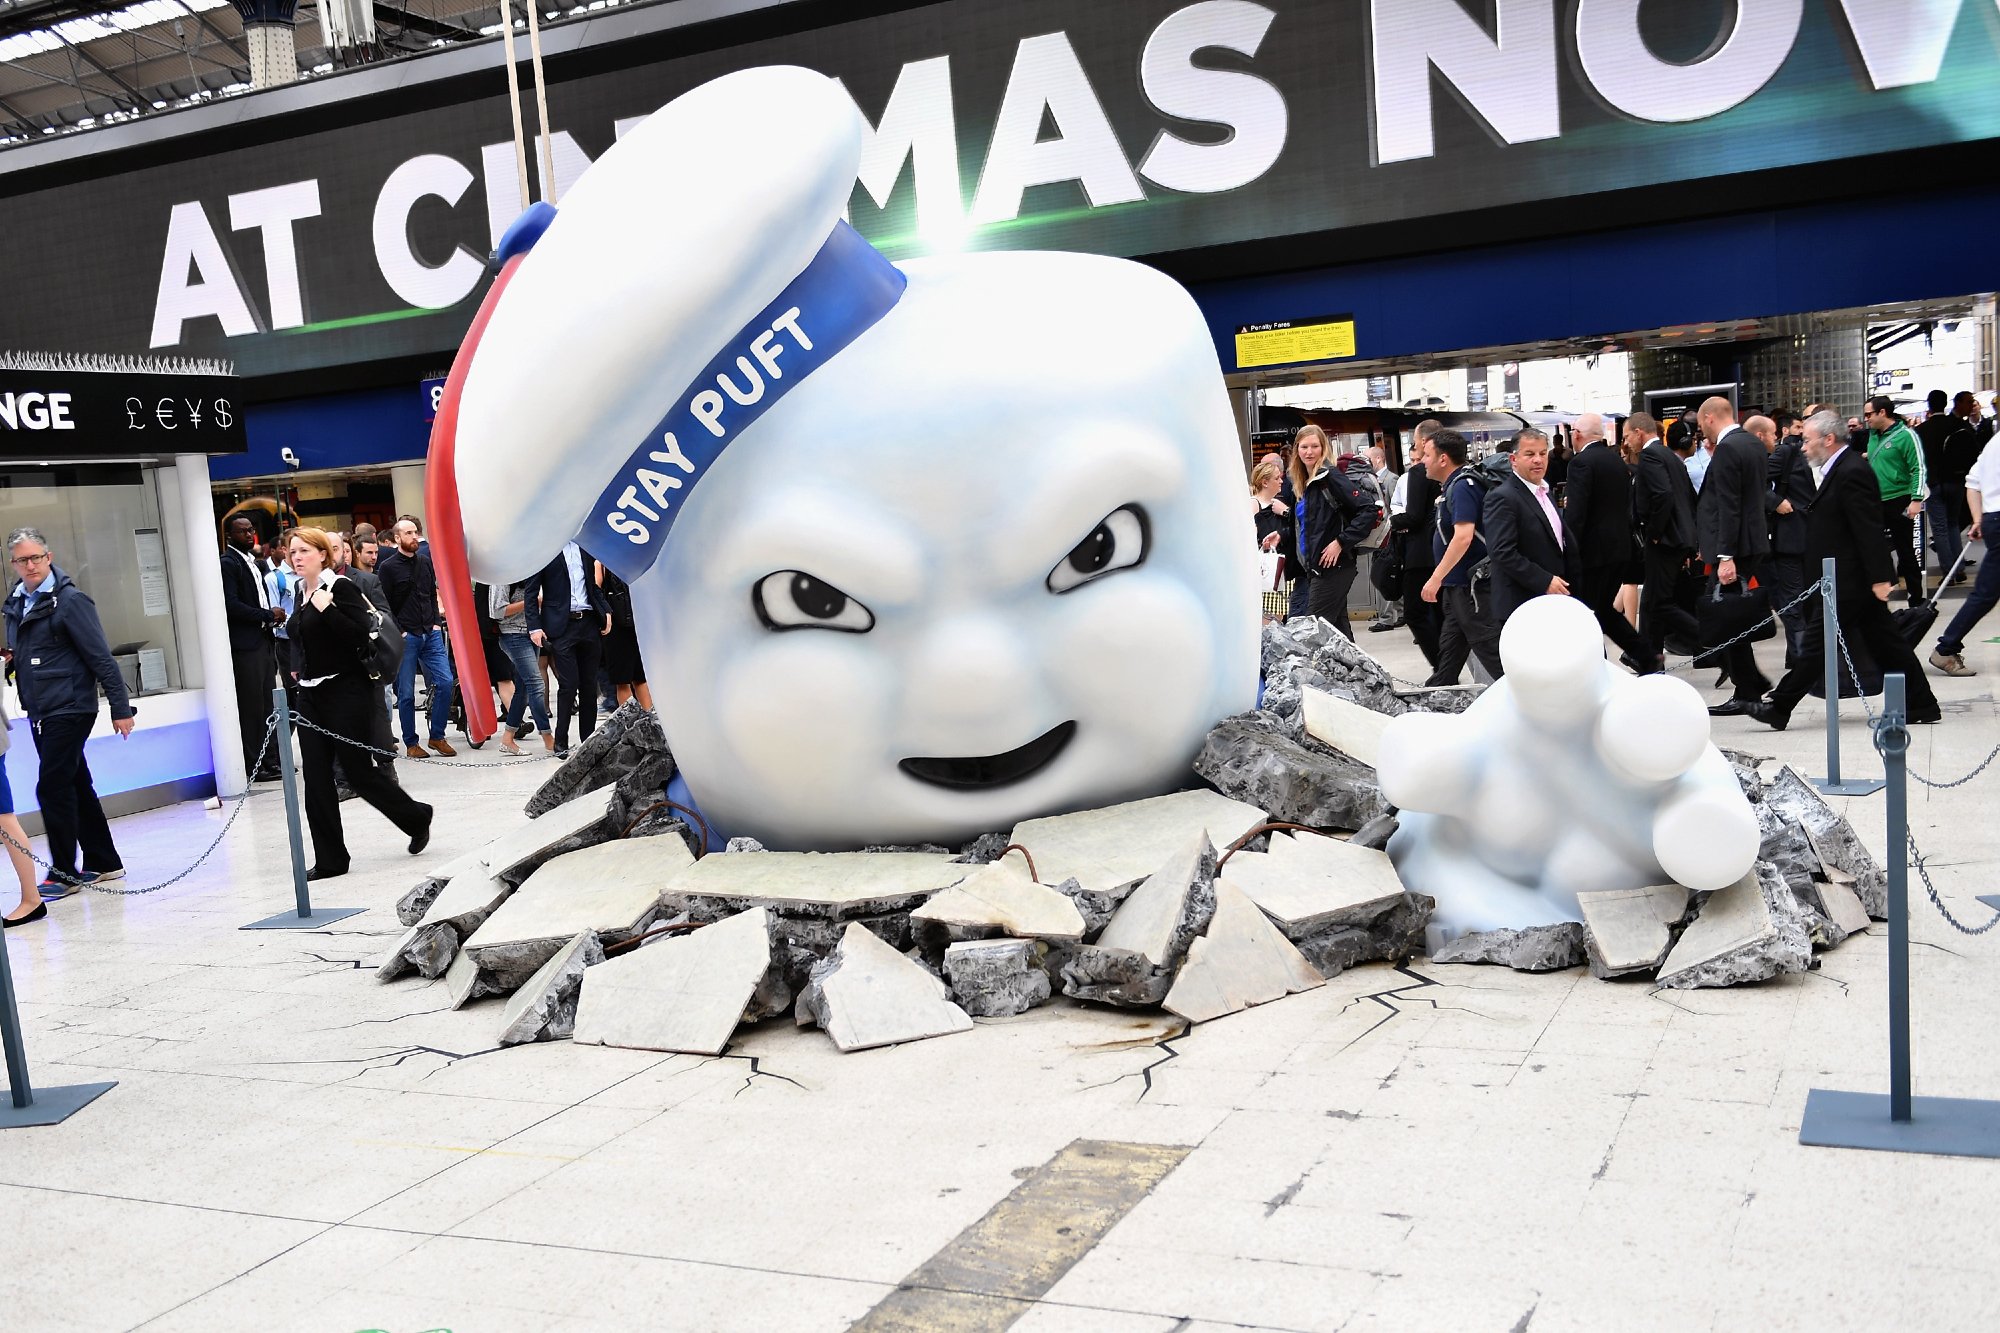 'Ghostbusters': The Stay Puft Marshsmallow Man on the concourse at Waterloo Station